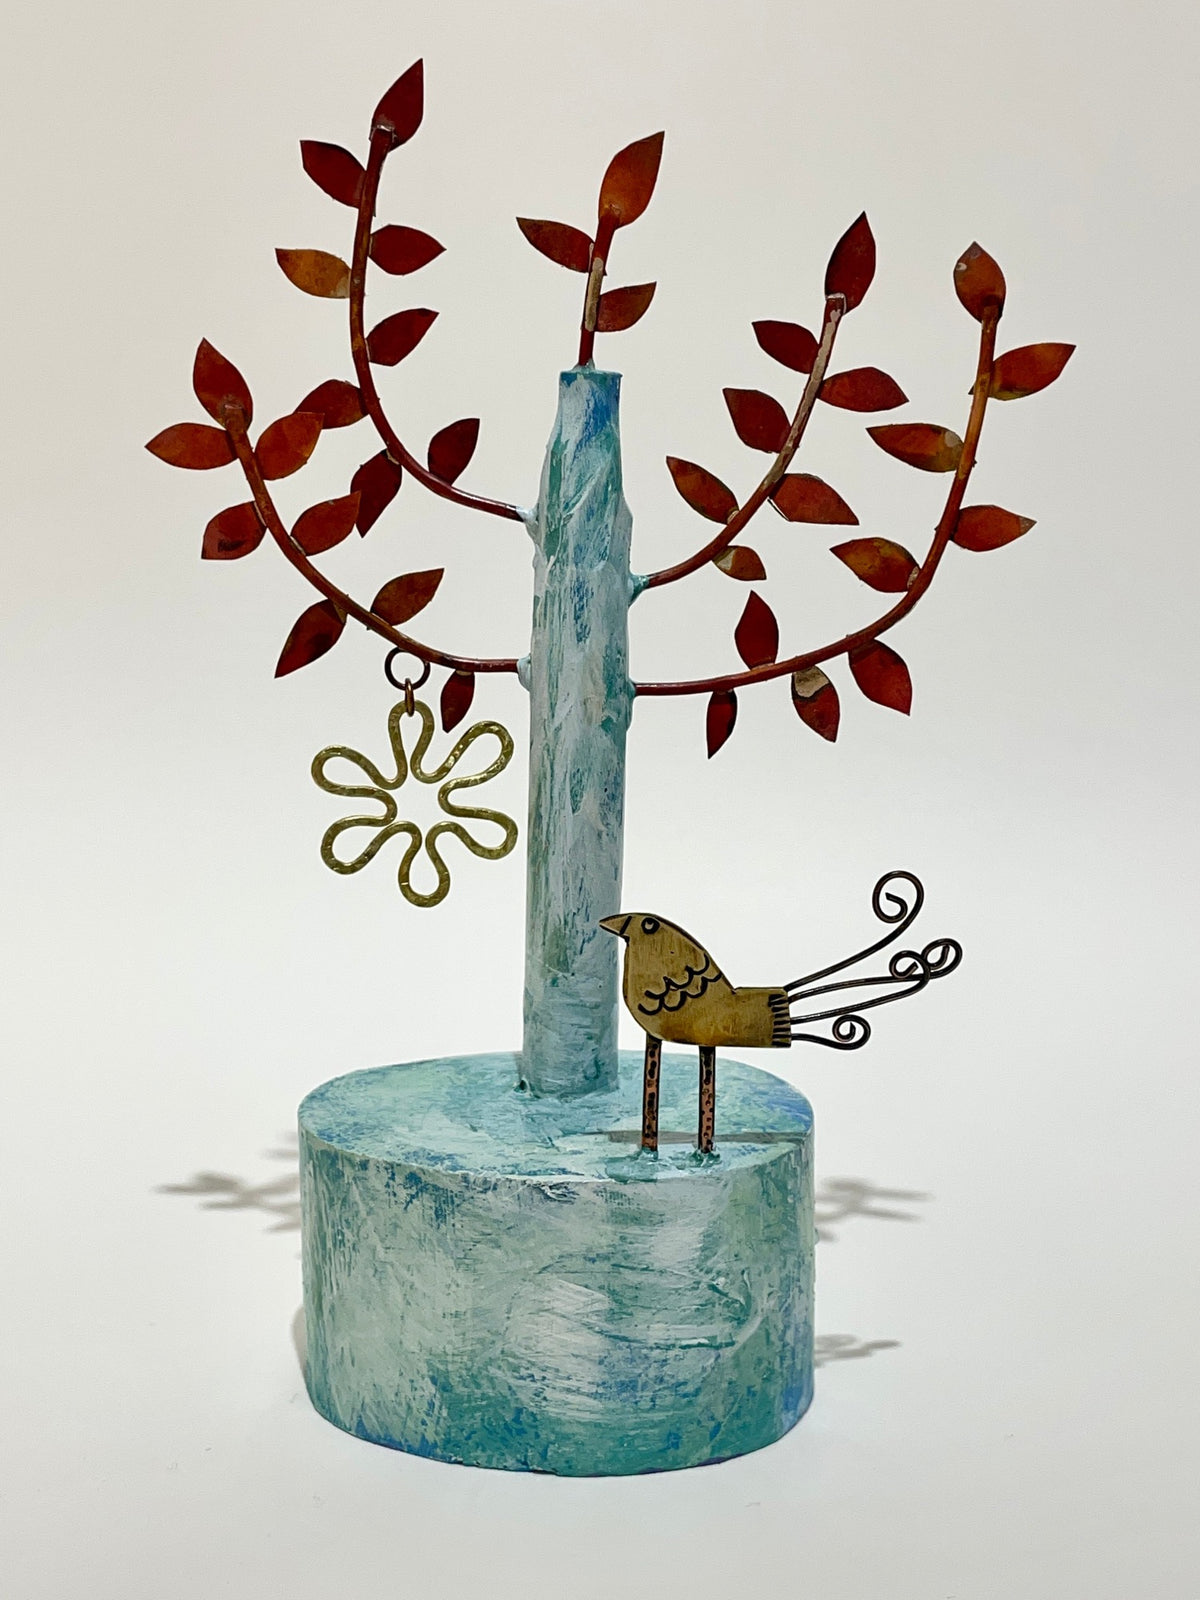 2020 Tree Small with Bird by Frances Noon